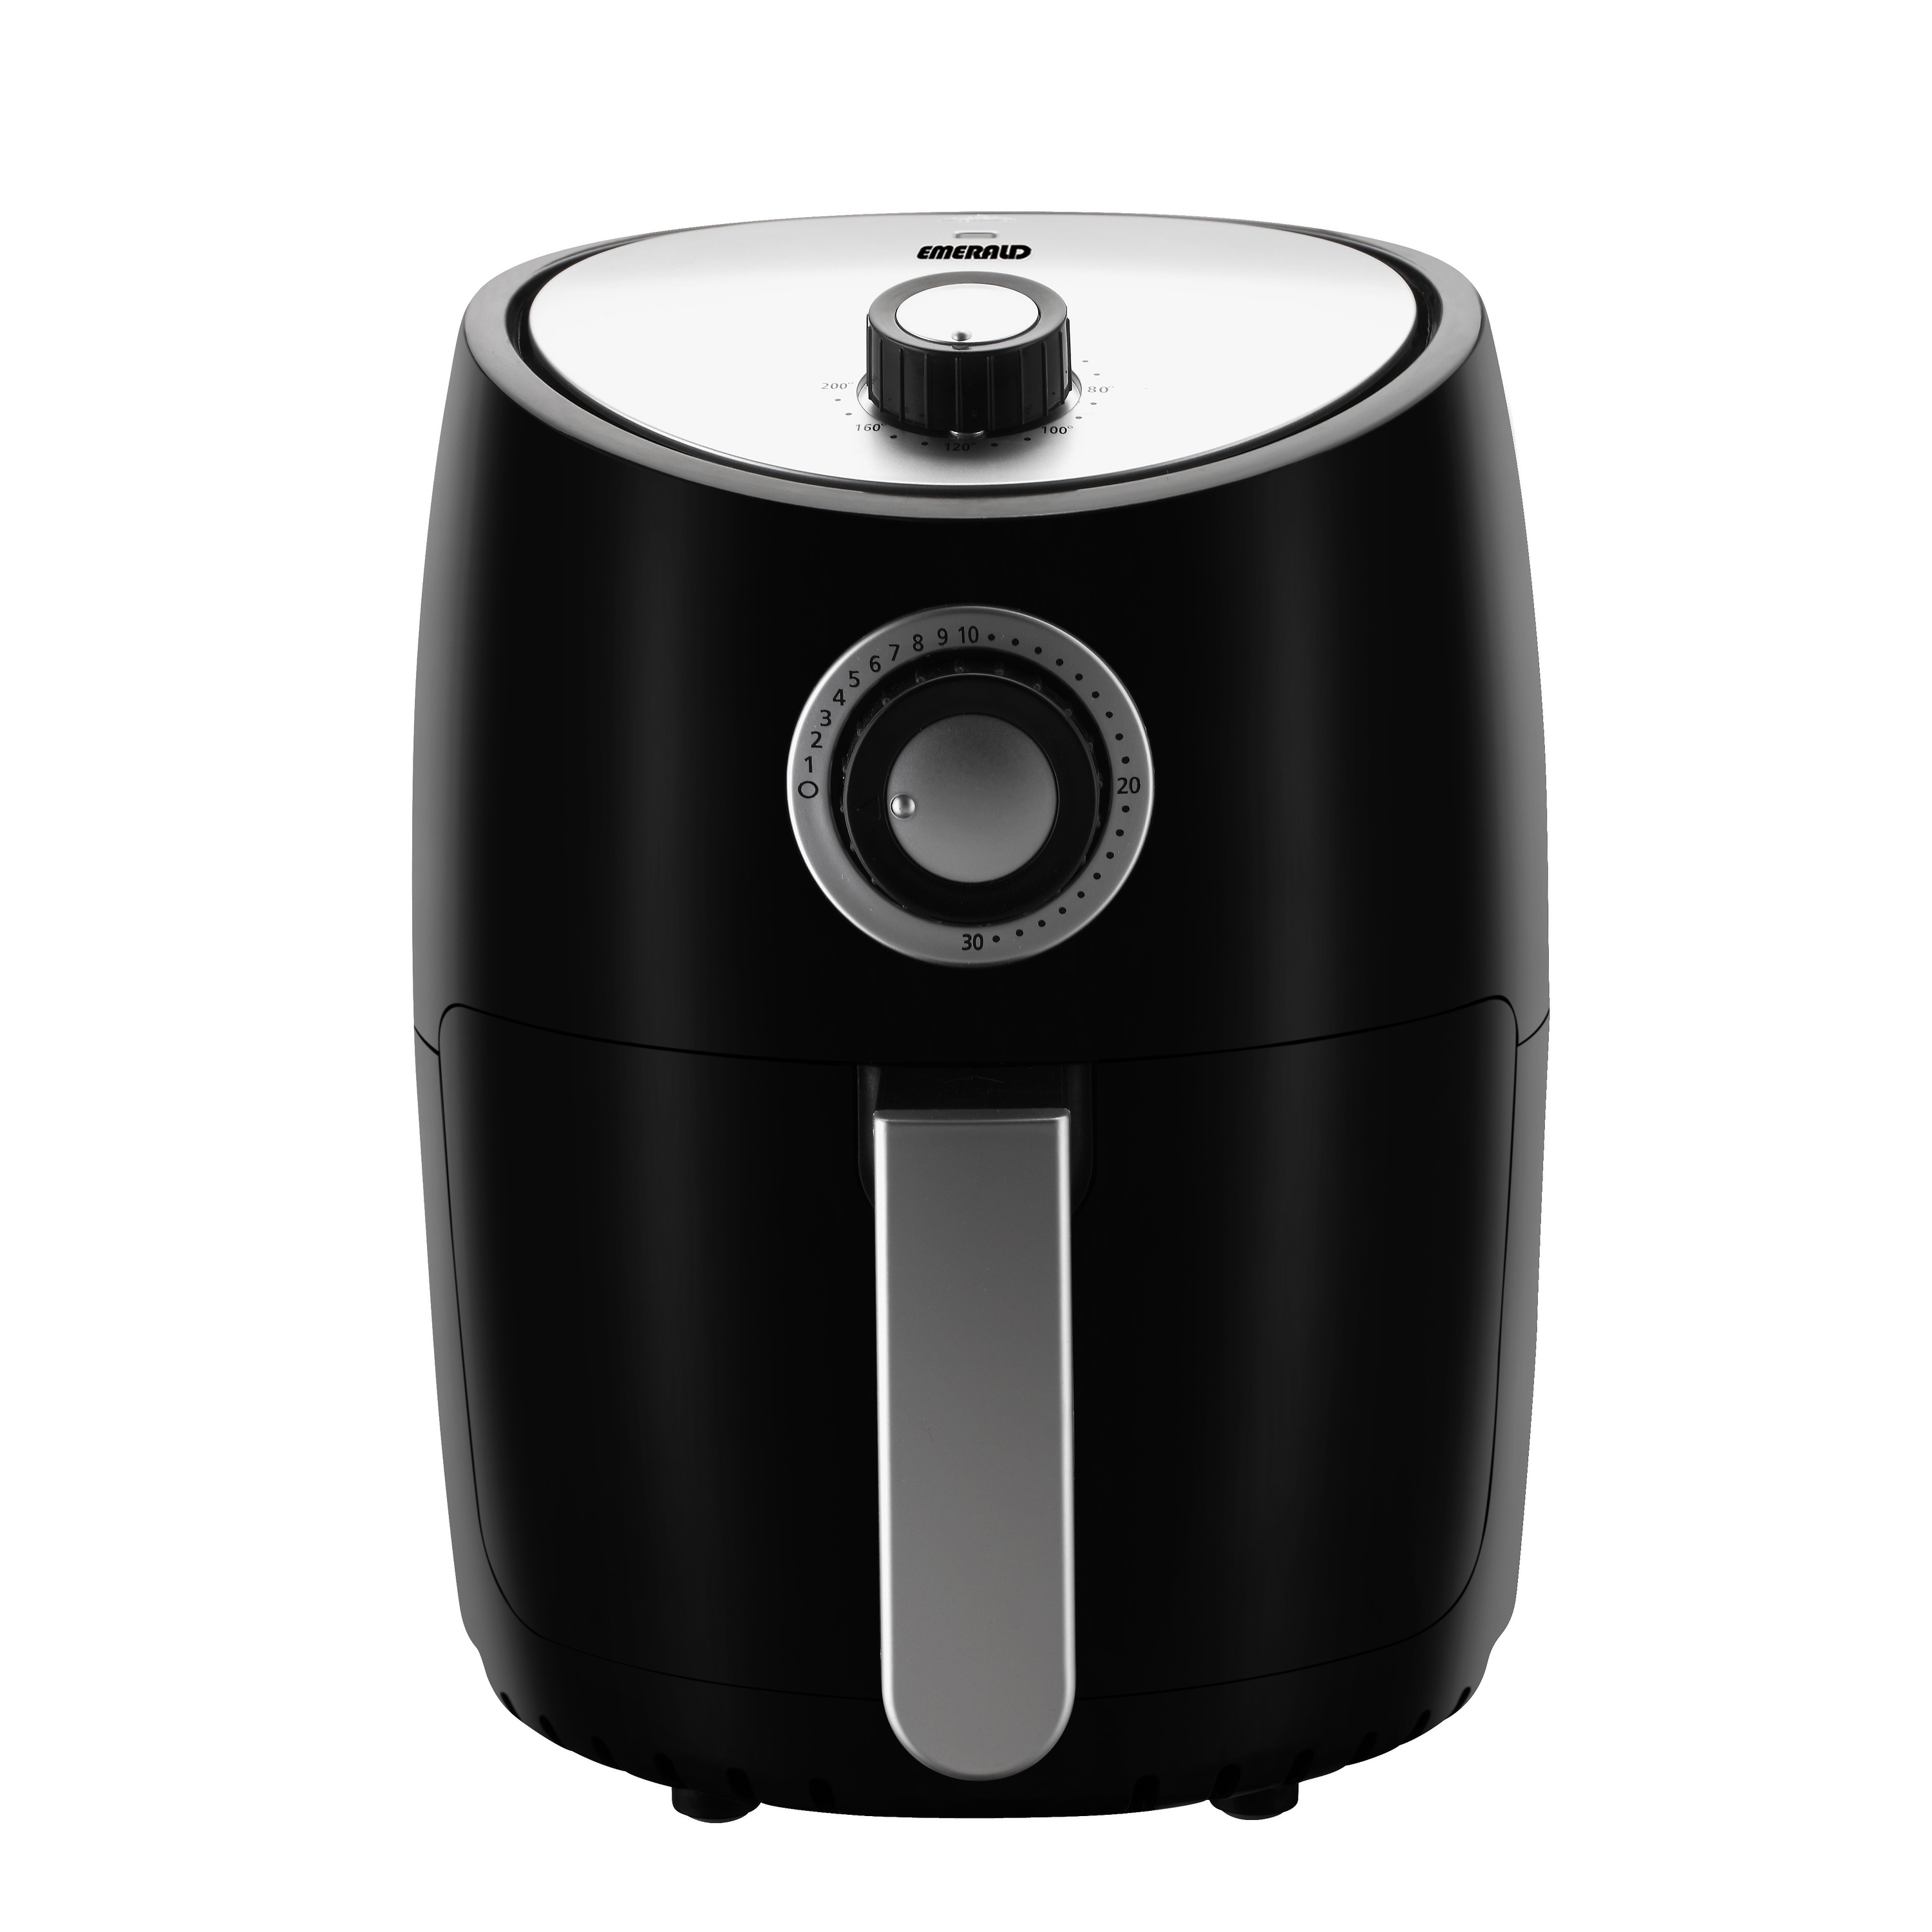 China High Speed Easy Clean Fryer 3.2L No Oil Electric Air Fryer